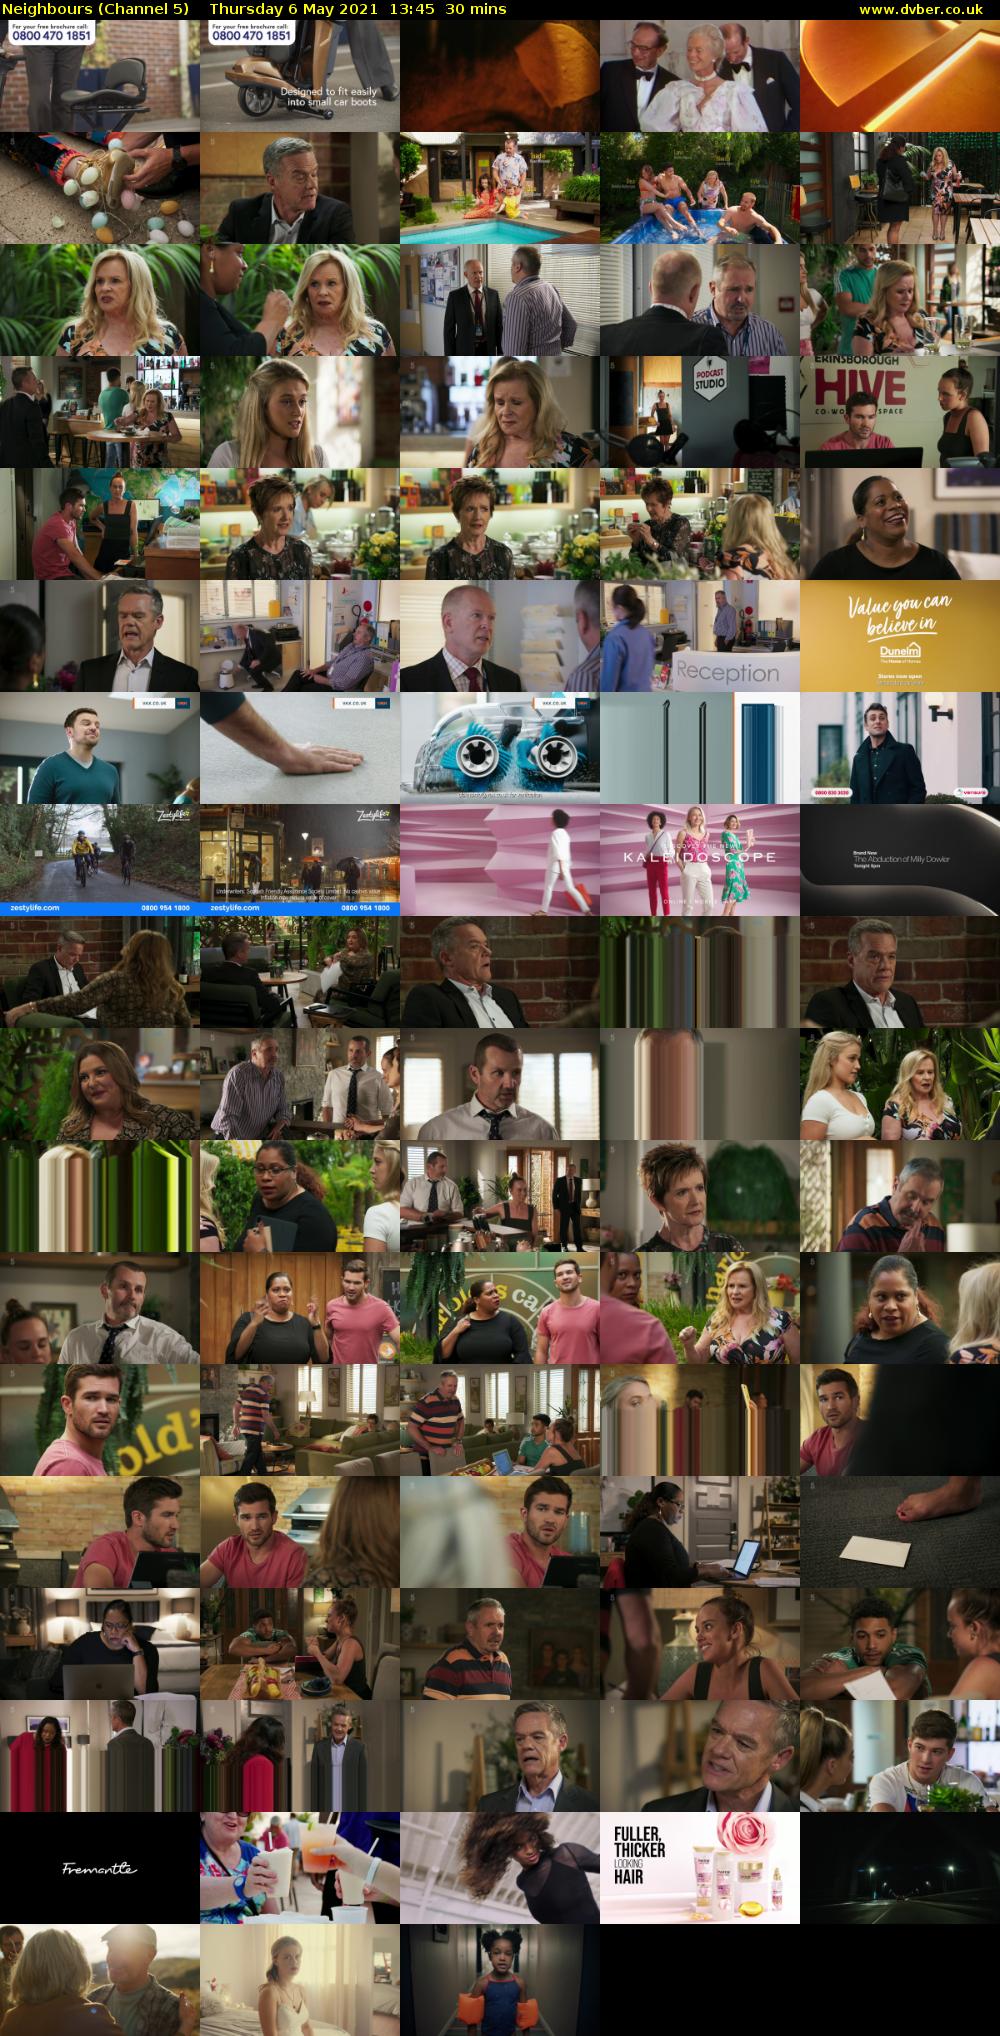 Neighbours (Channel 5) Thursday 6 May 2021 13:45 - 14:15